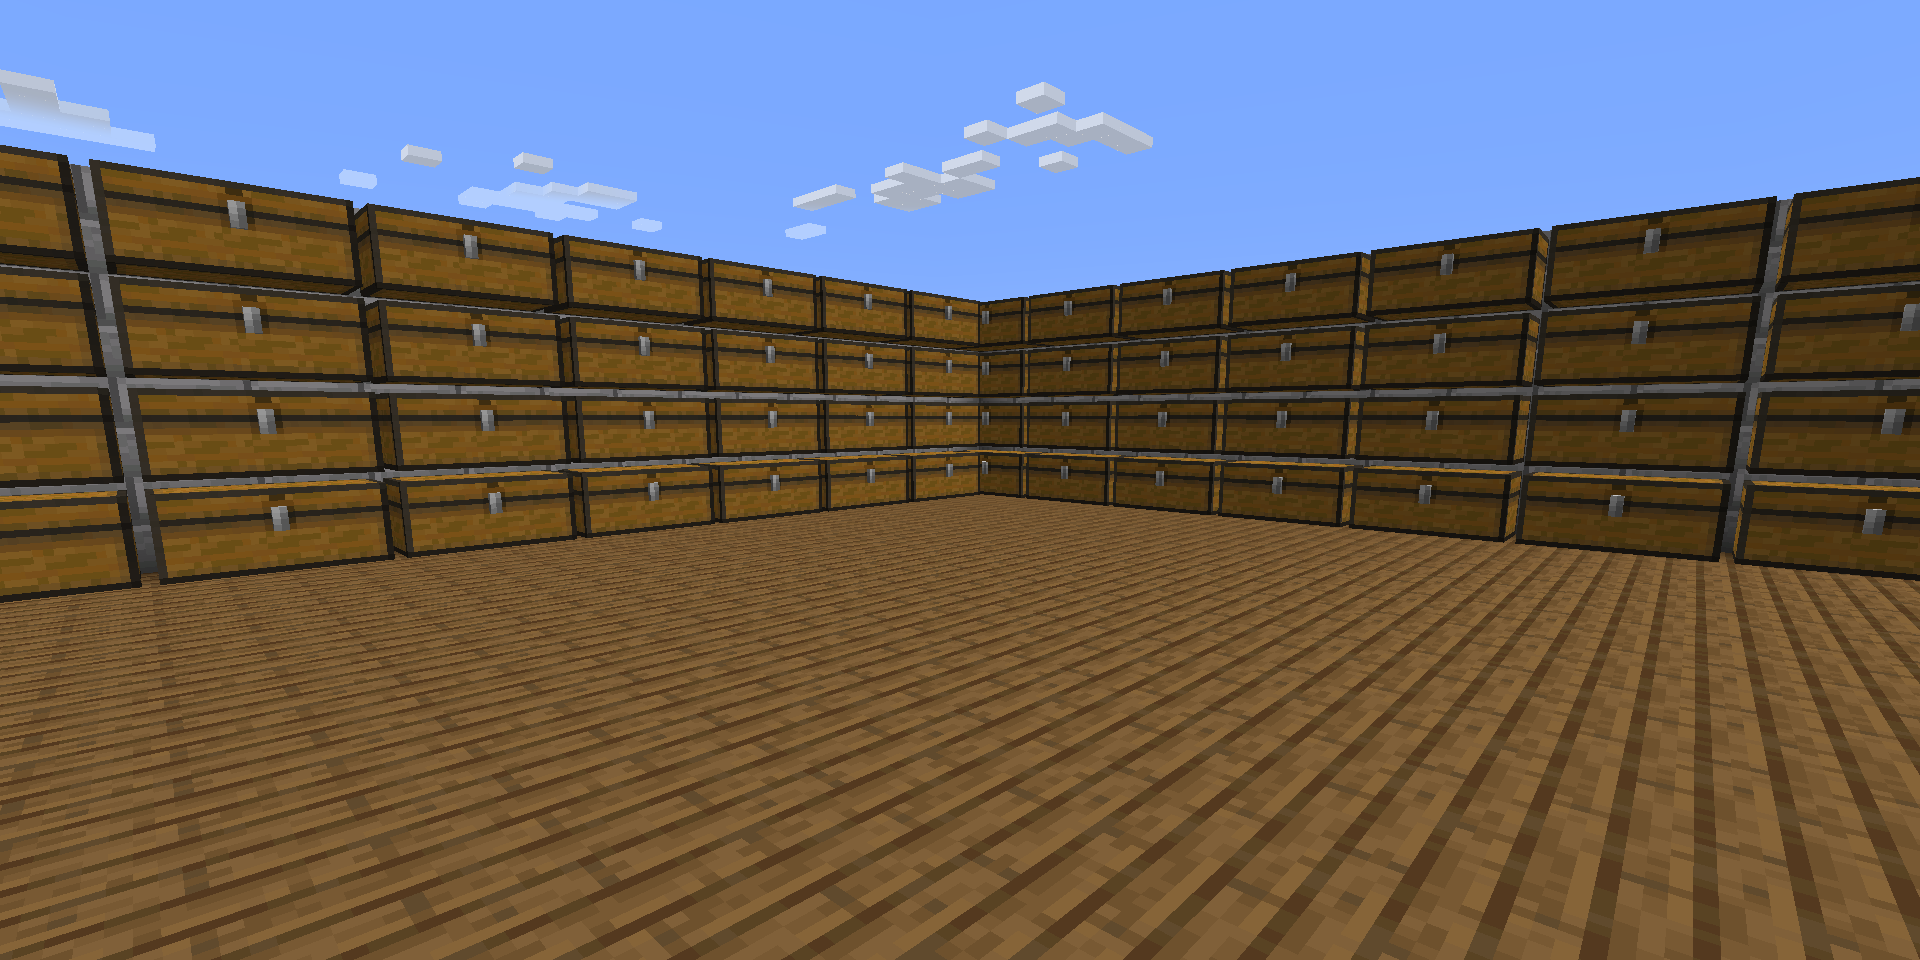 A large room in Minecraft with stacked chests and wooden floor